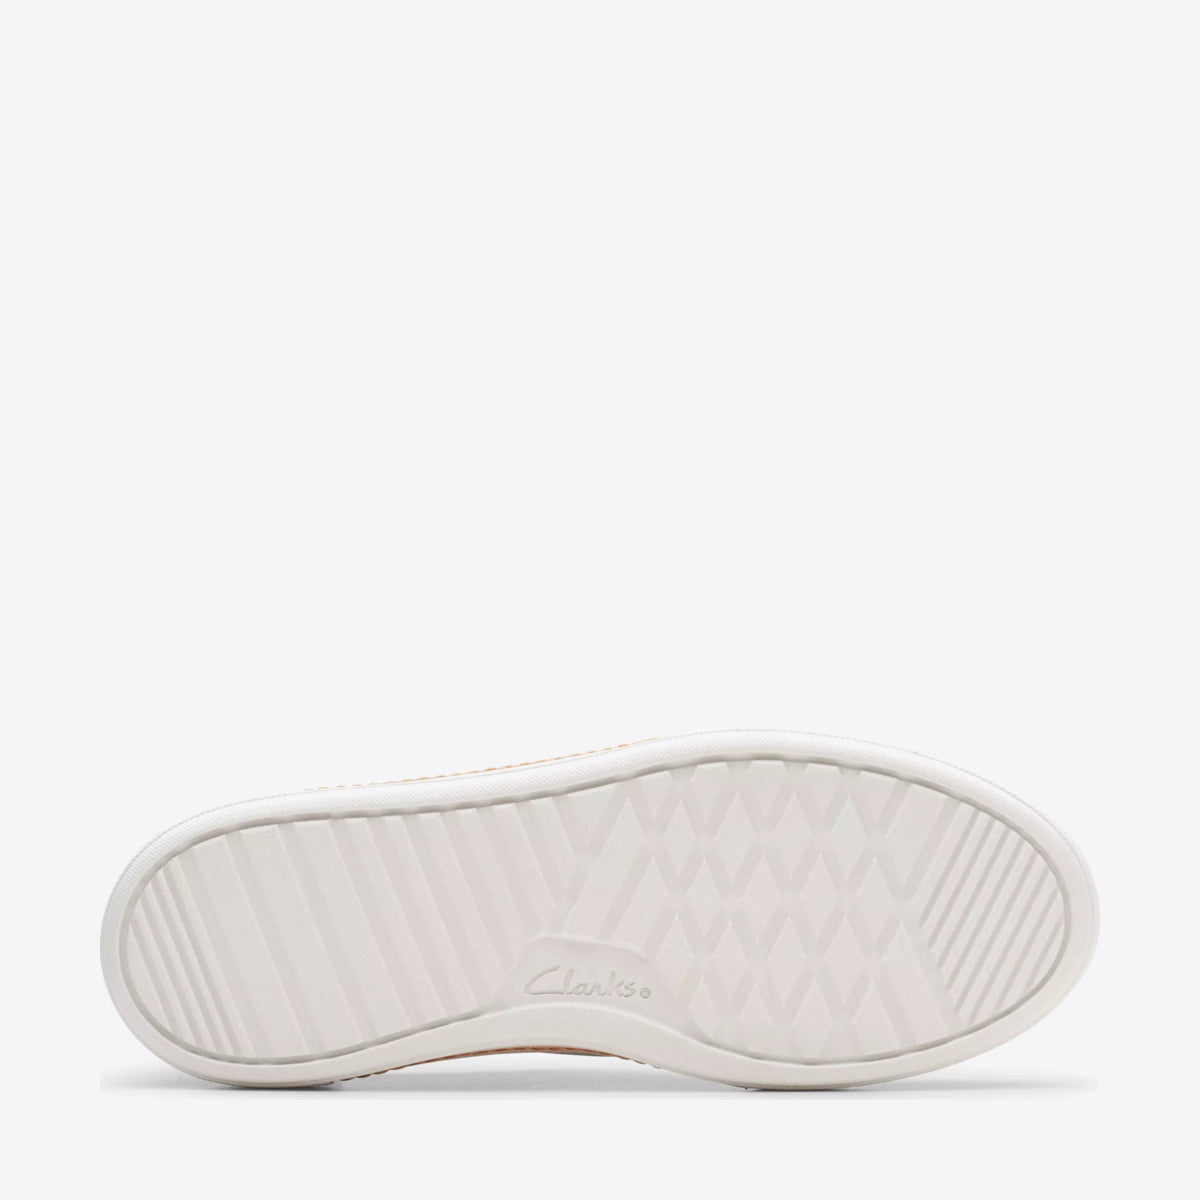 CLARKS Womens Hollyhock Off White Leather - Image 3